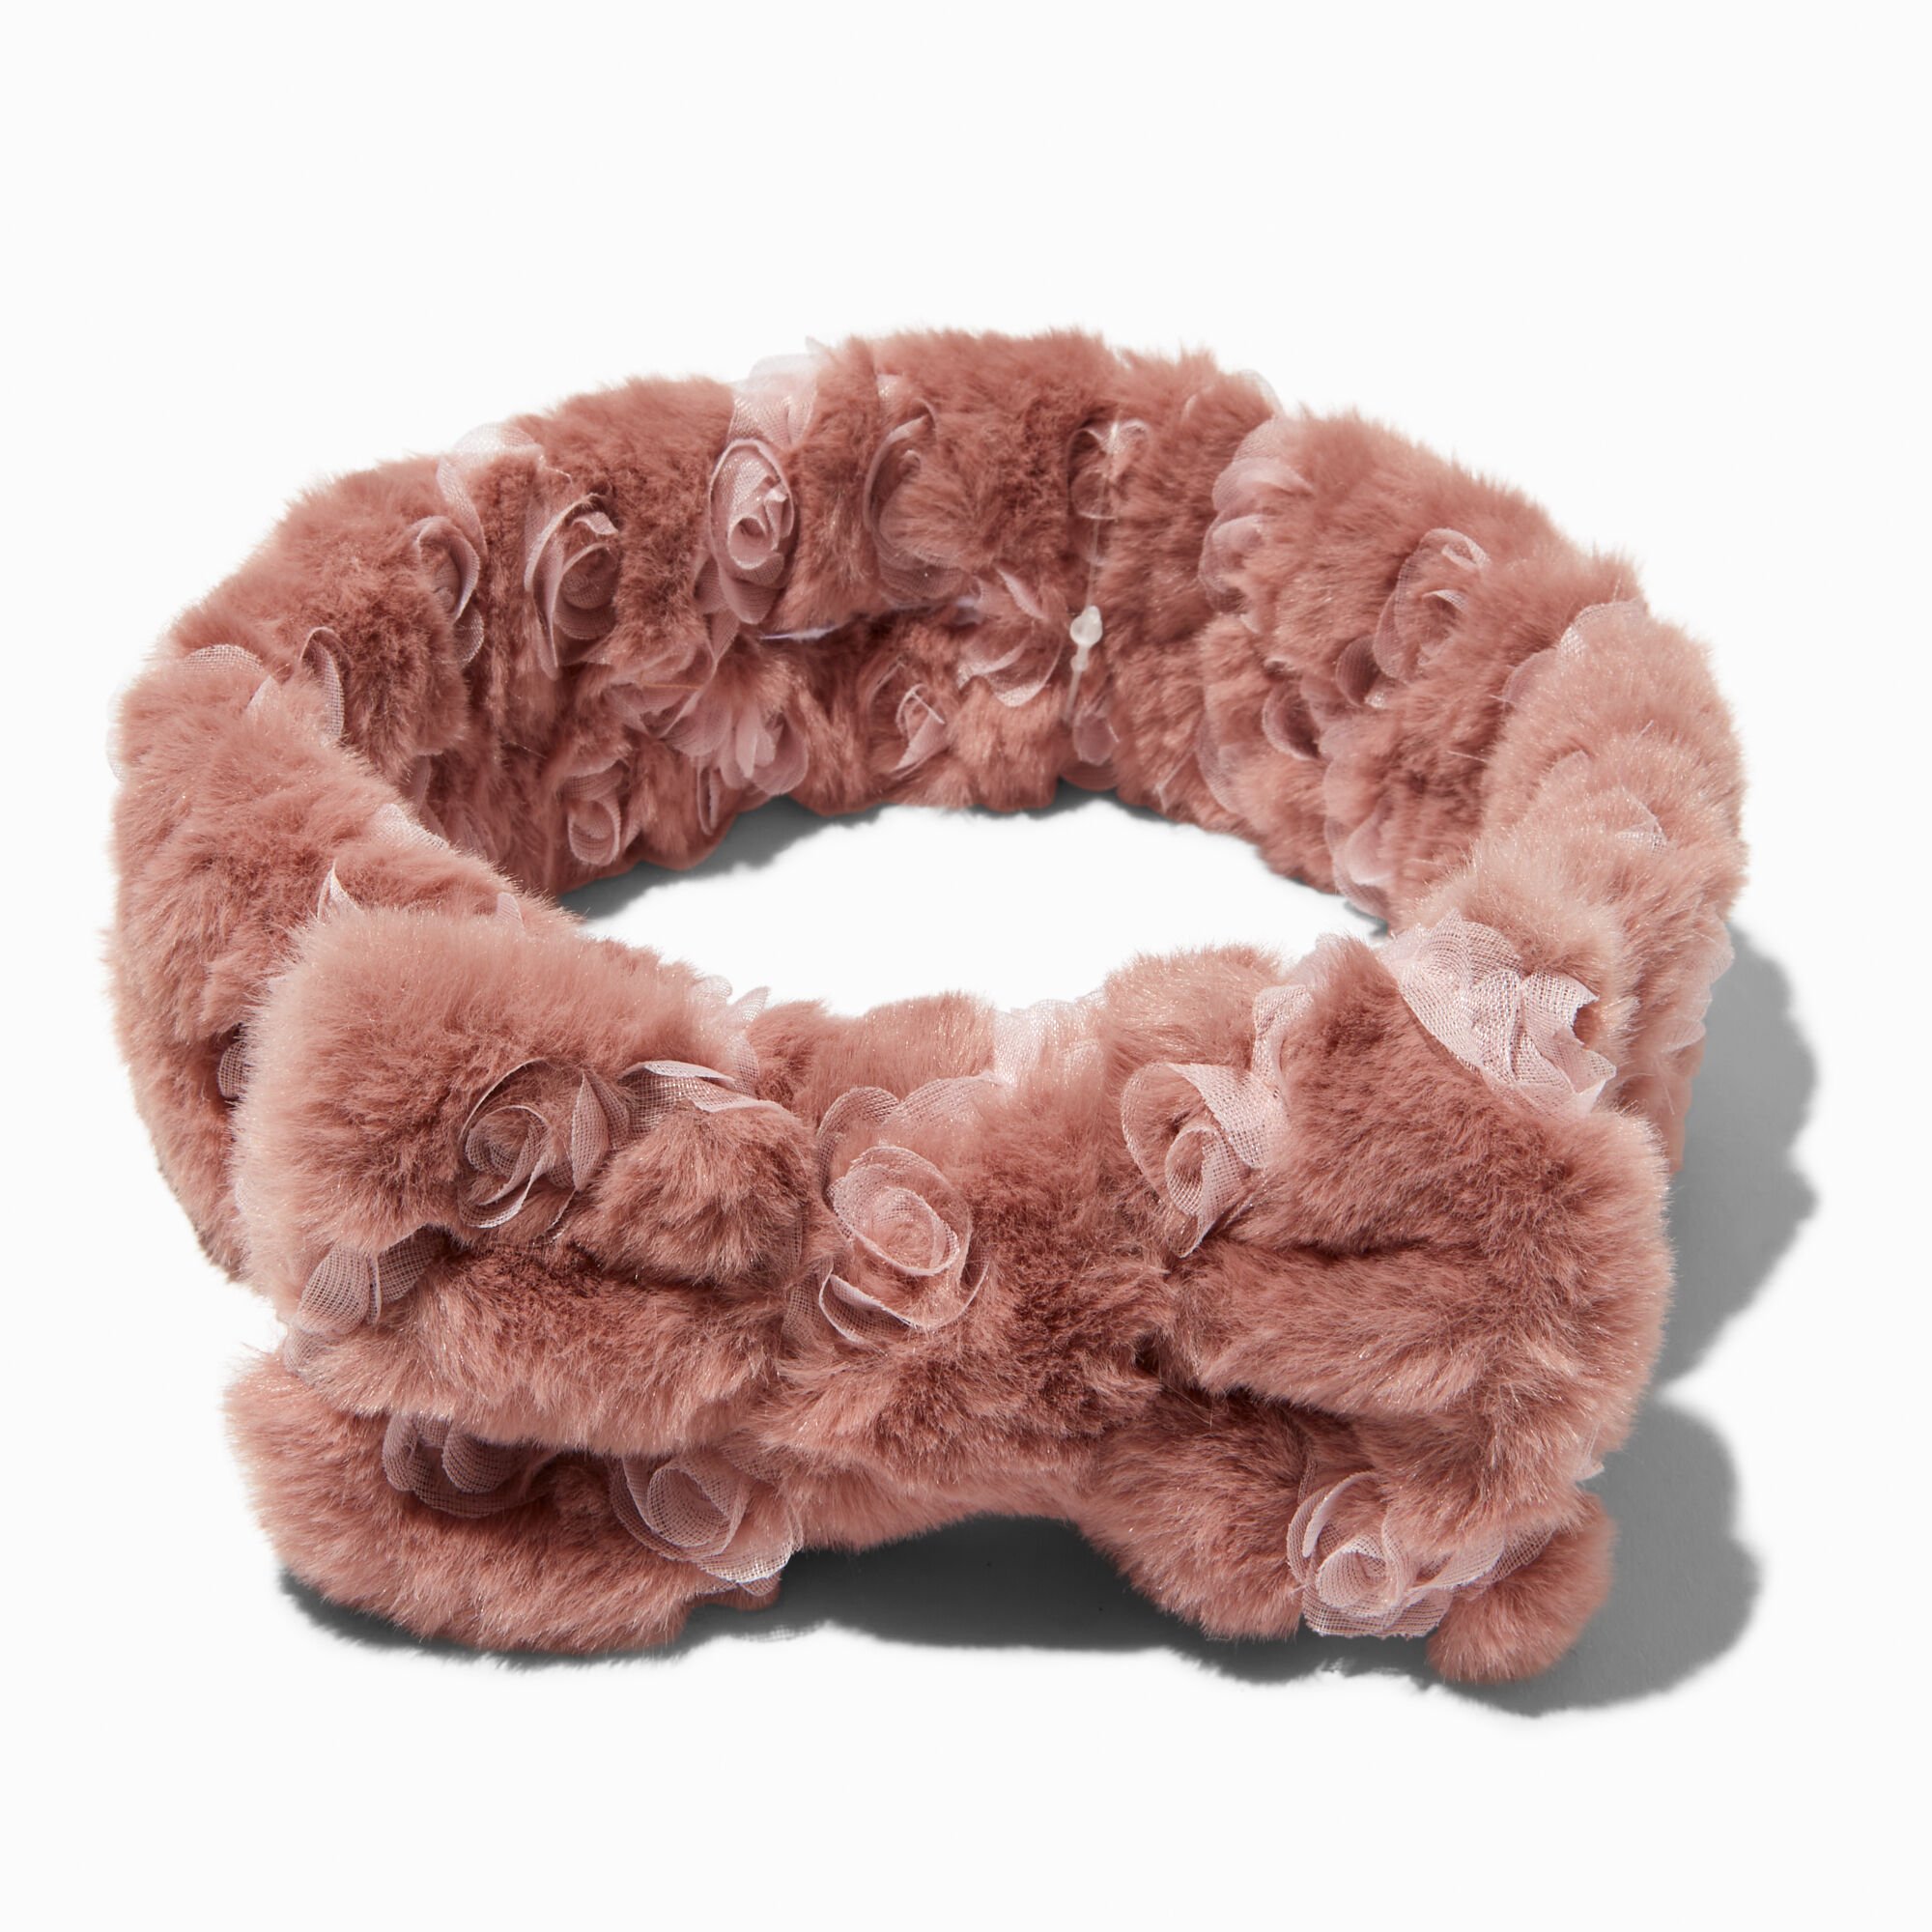 View Claires Furry Makeup Bow Headwrap Dusty Rose information